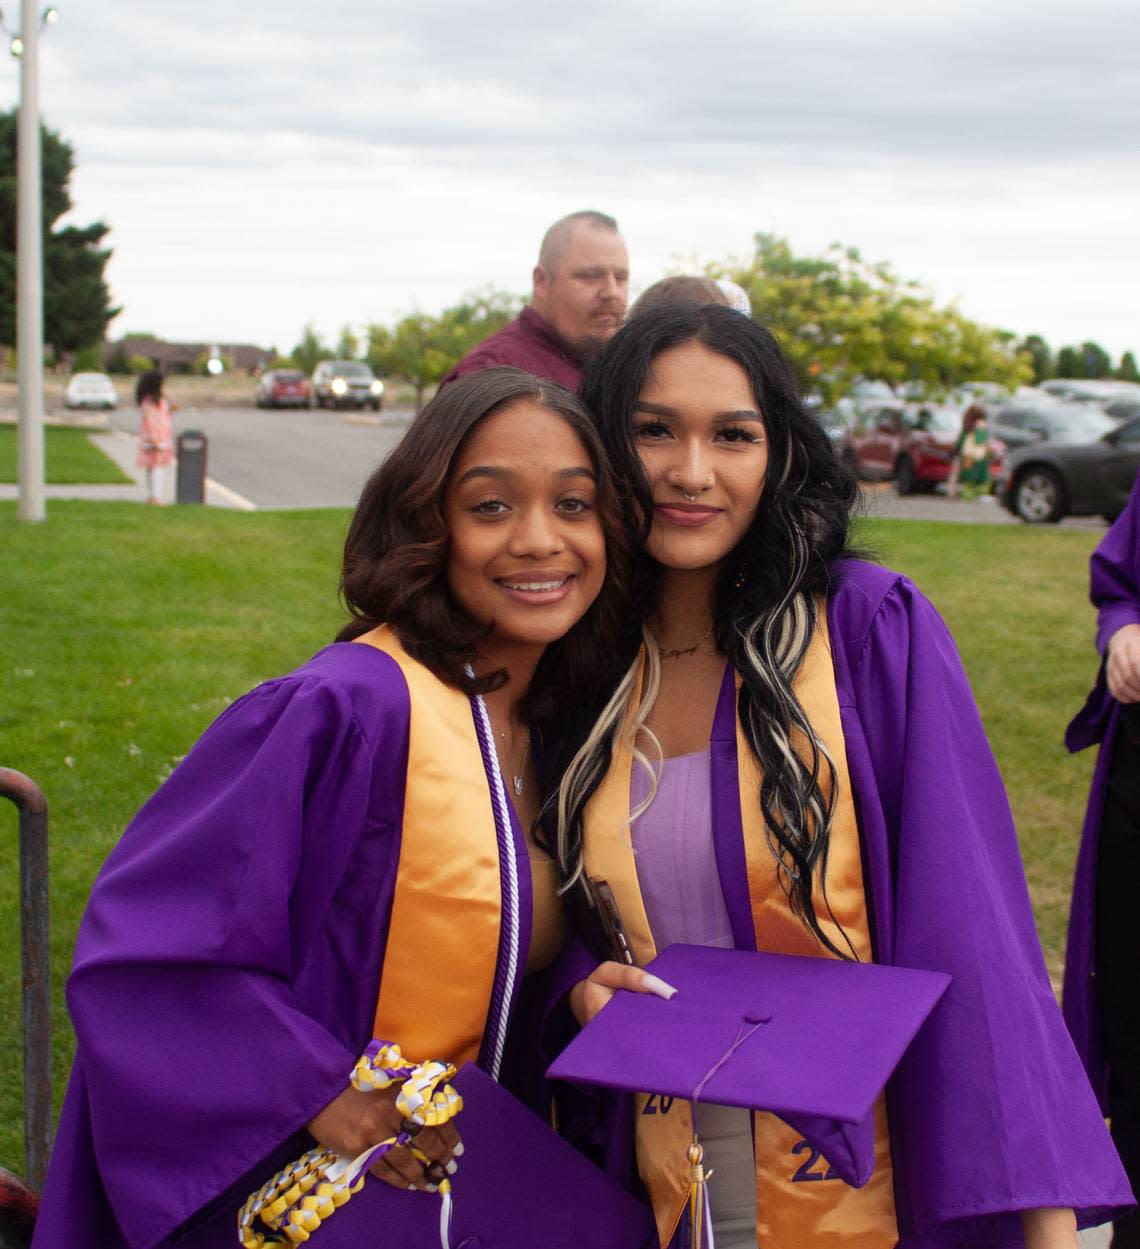 Jatzivy Sarabia, right, graduated from Hanford High School in June 2022. She planned to start attending Columbia Basin College in January but she was killed in a shooting Saturday.